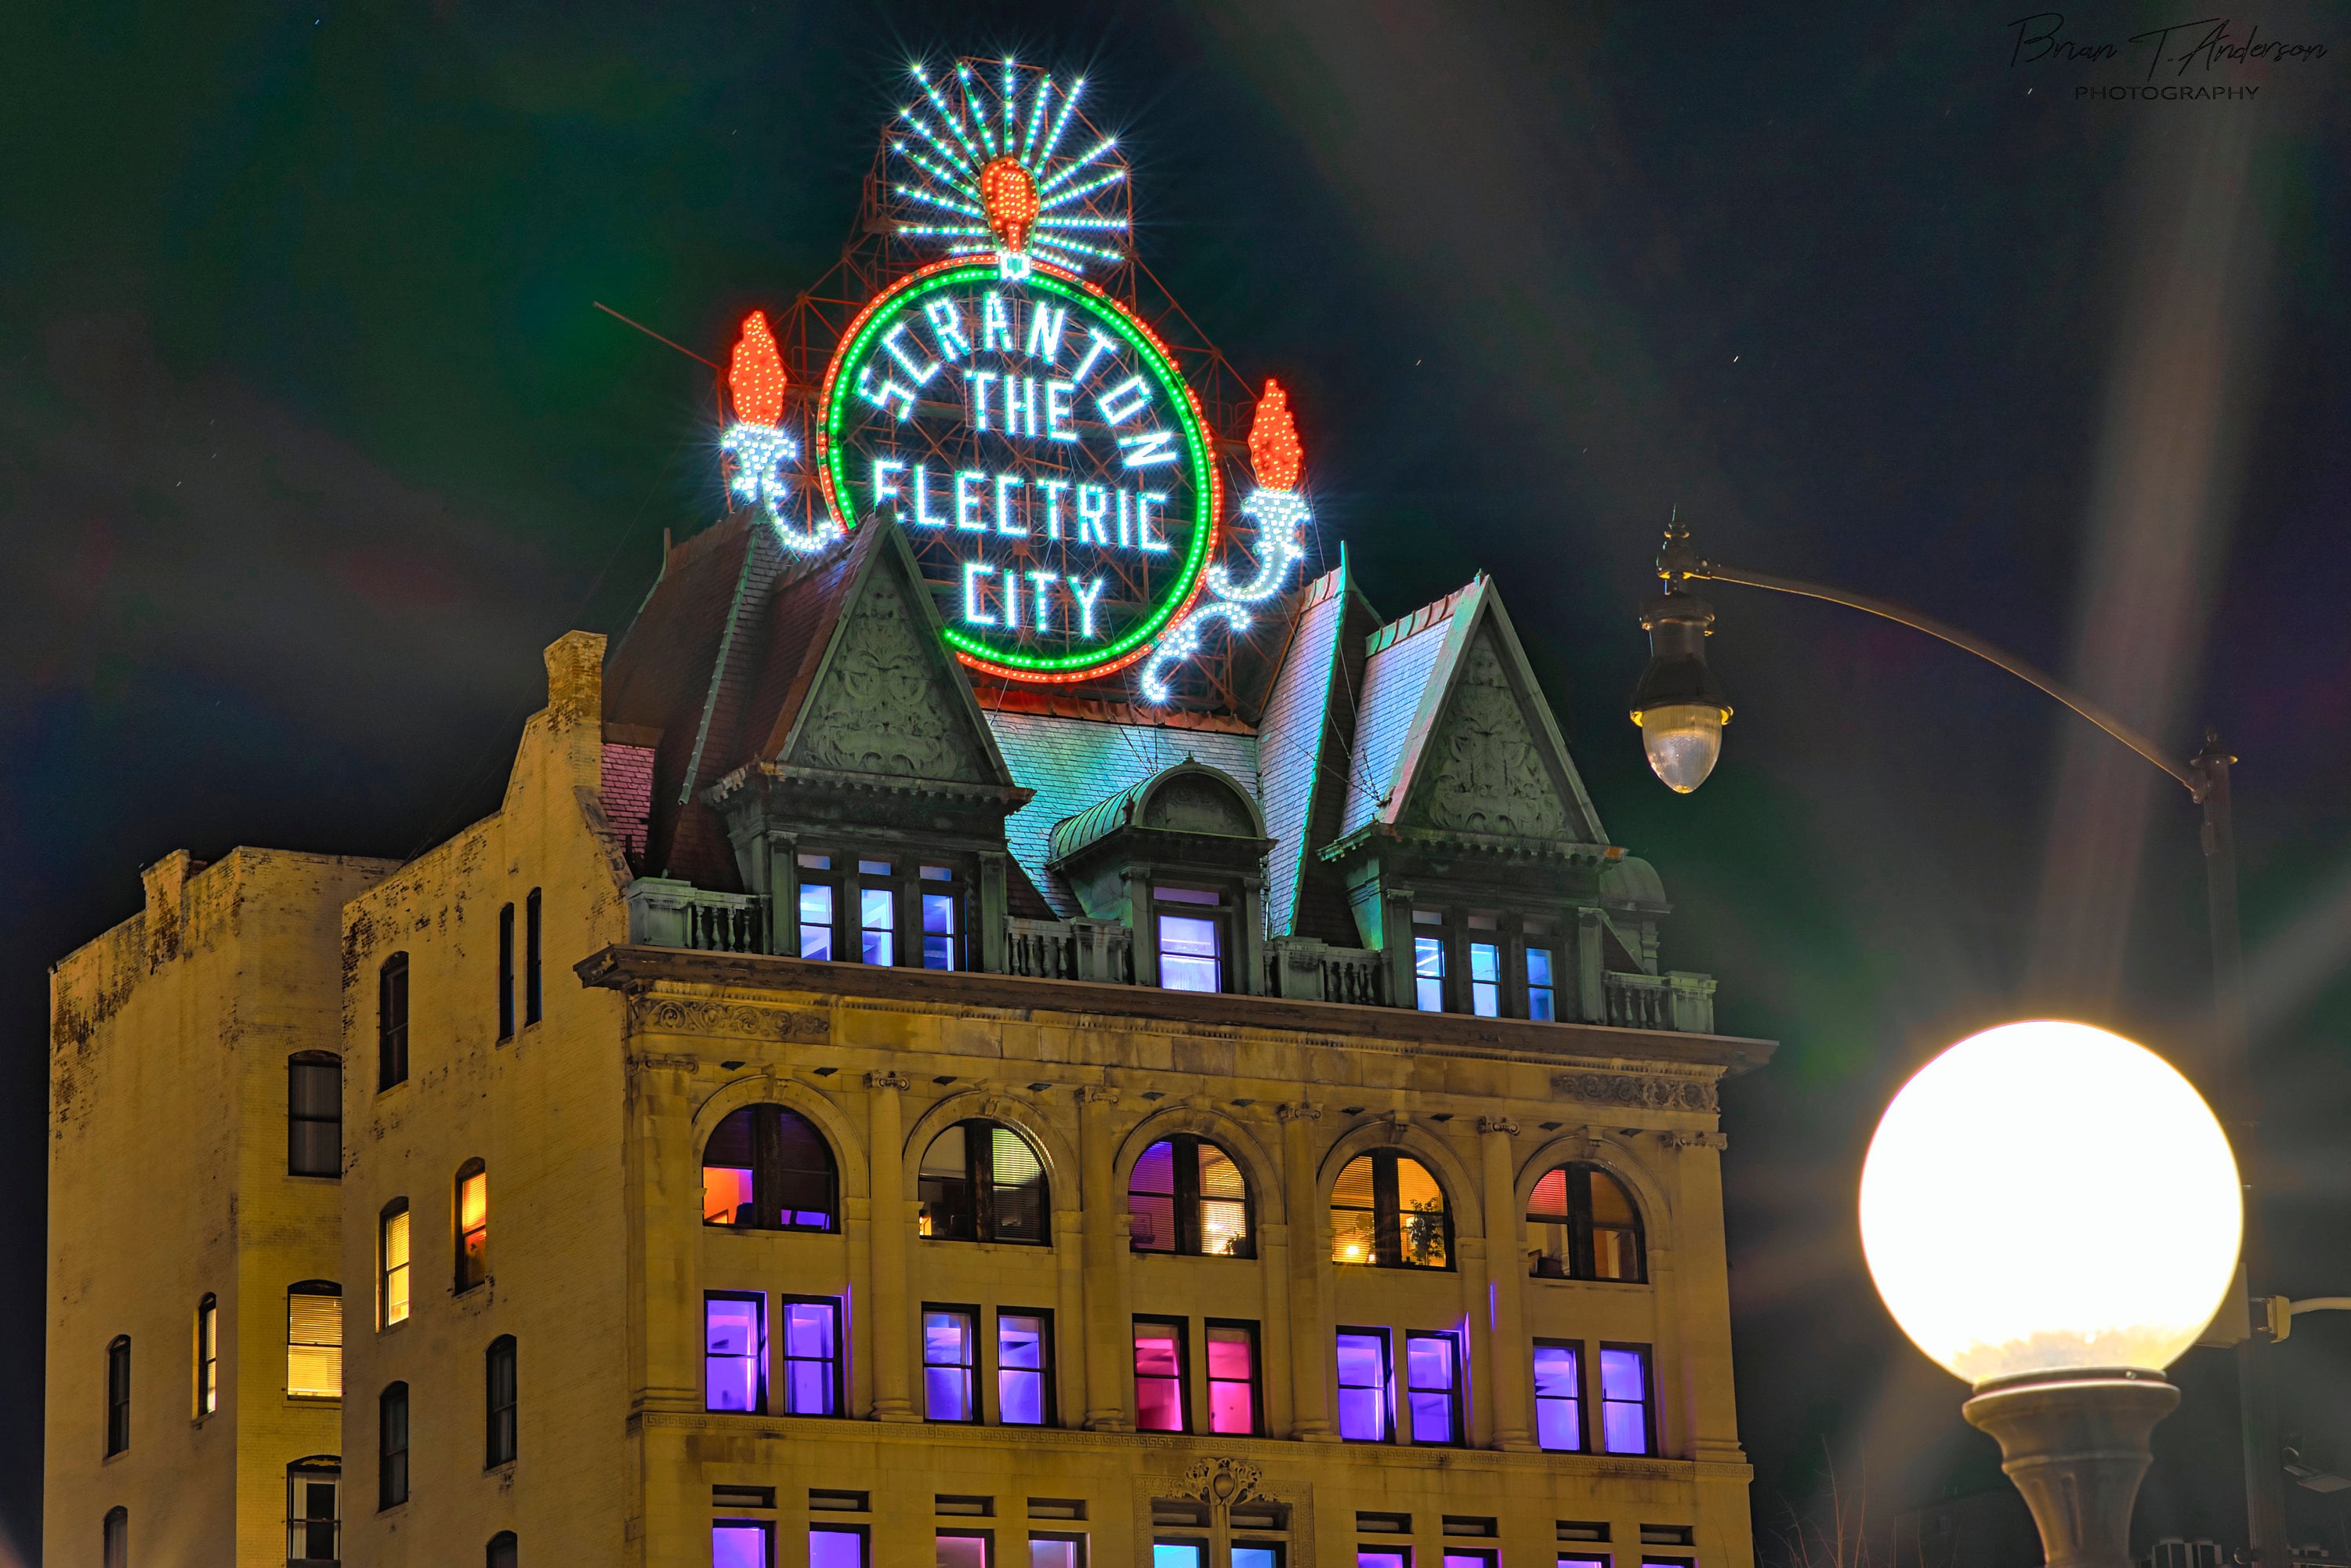 The Electric City Sign in Scranton Pa image